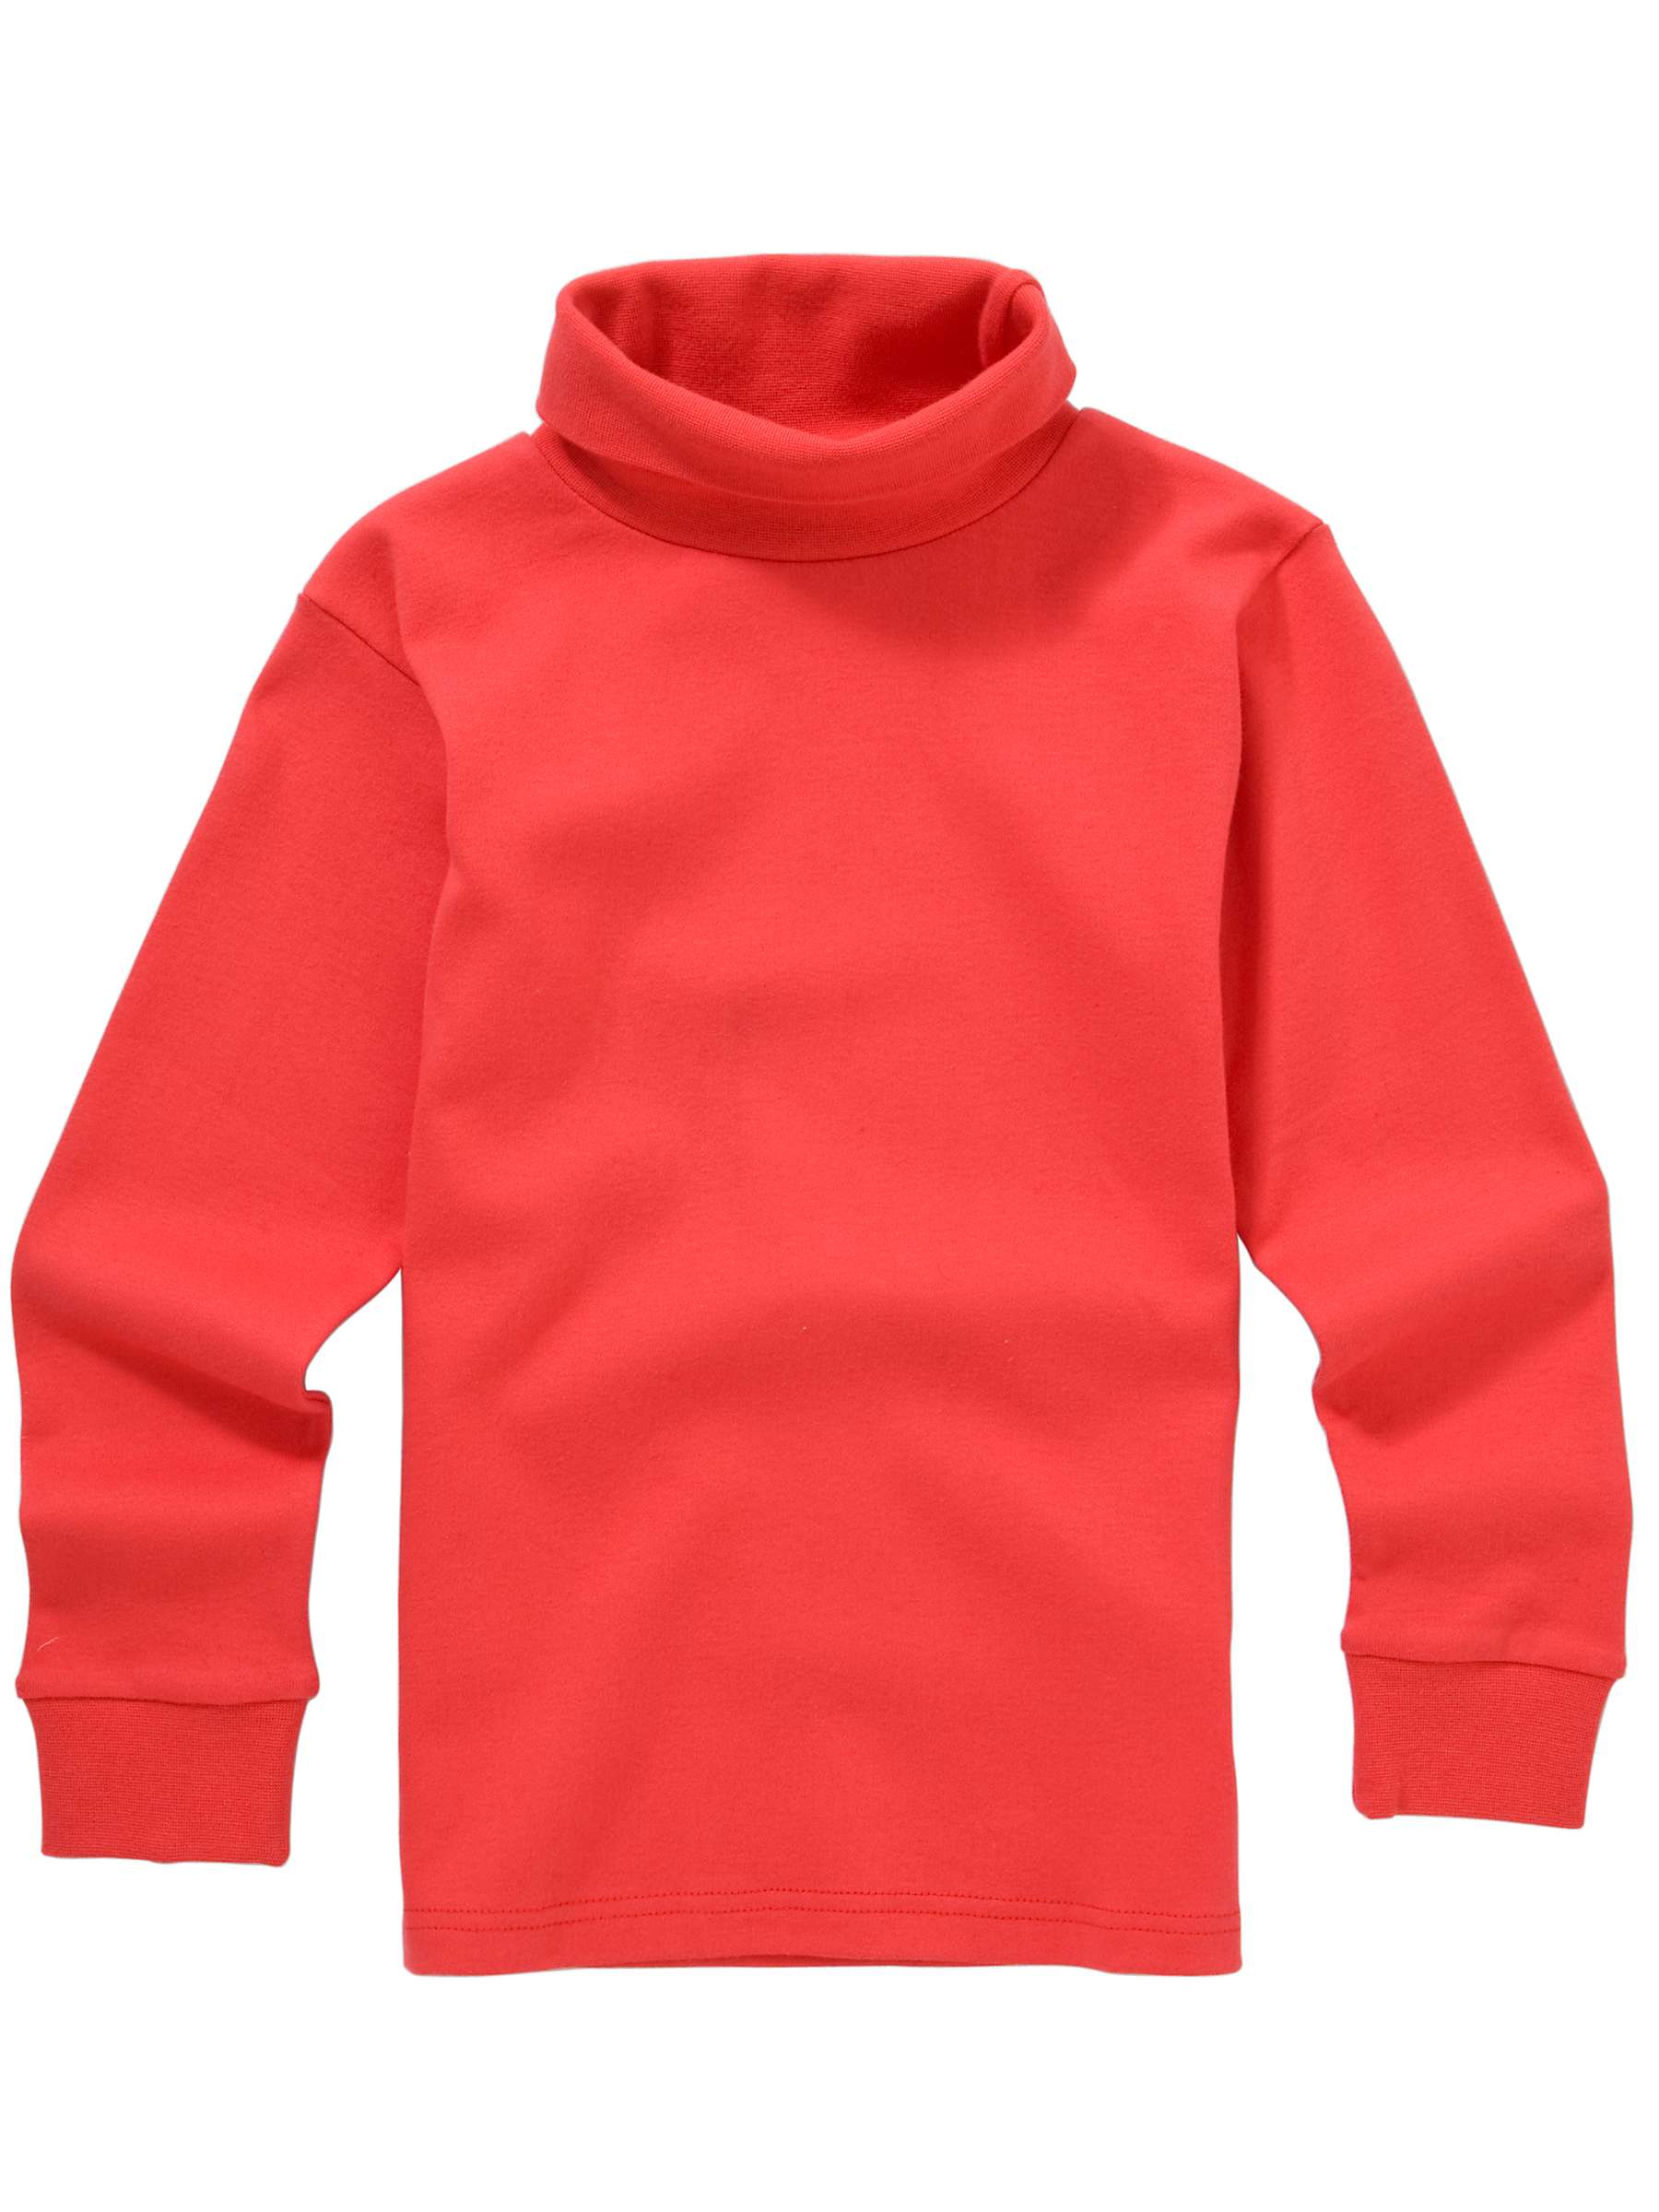 Buy School Long Sleeve Polo Neck, Red Online at johnlewis.com